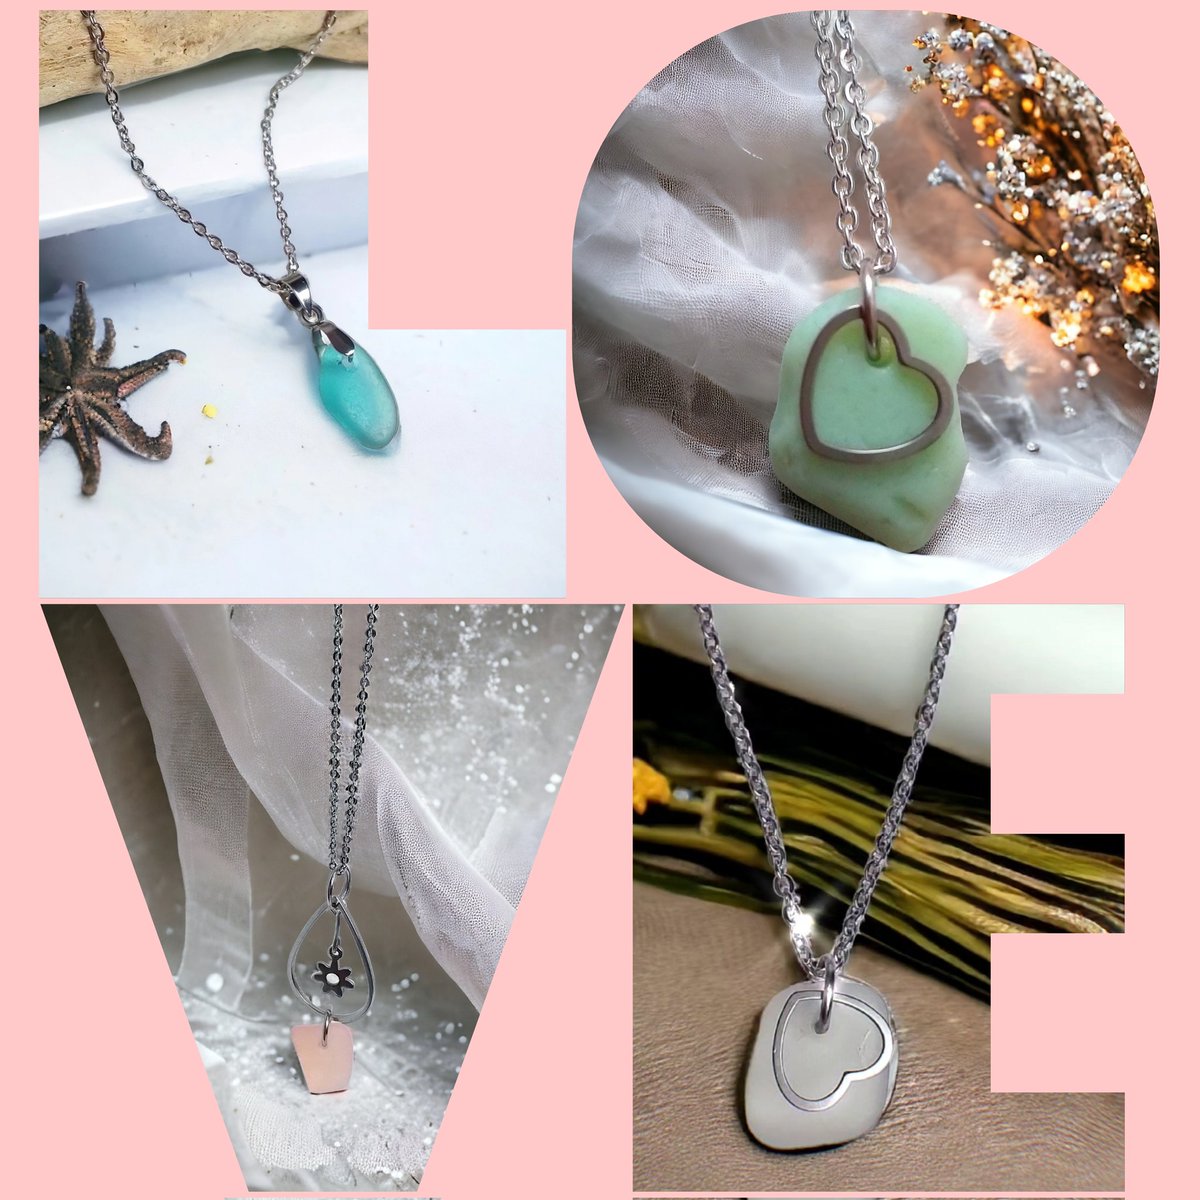 Some seaglass from the wedding collection x🤍twistedthreadsukshop.etsy.com
#twistedthreadsukshop #jewelry #necklace #seaglass 
#weddinginspiration